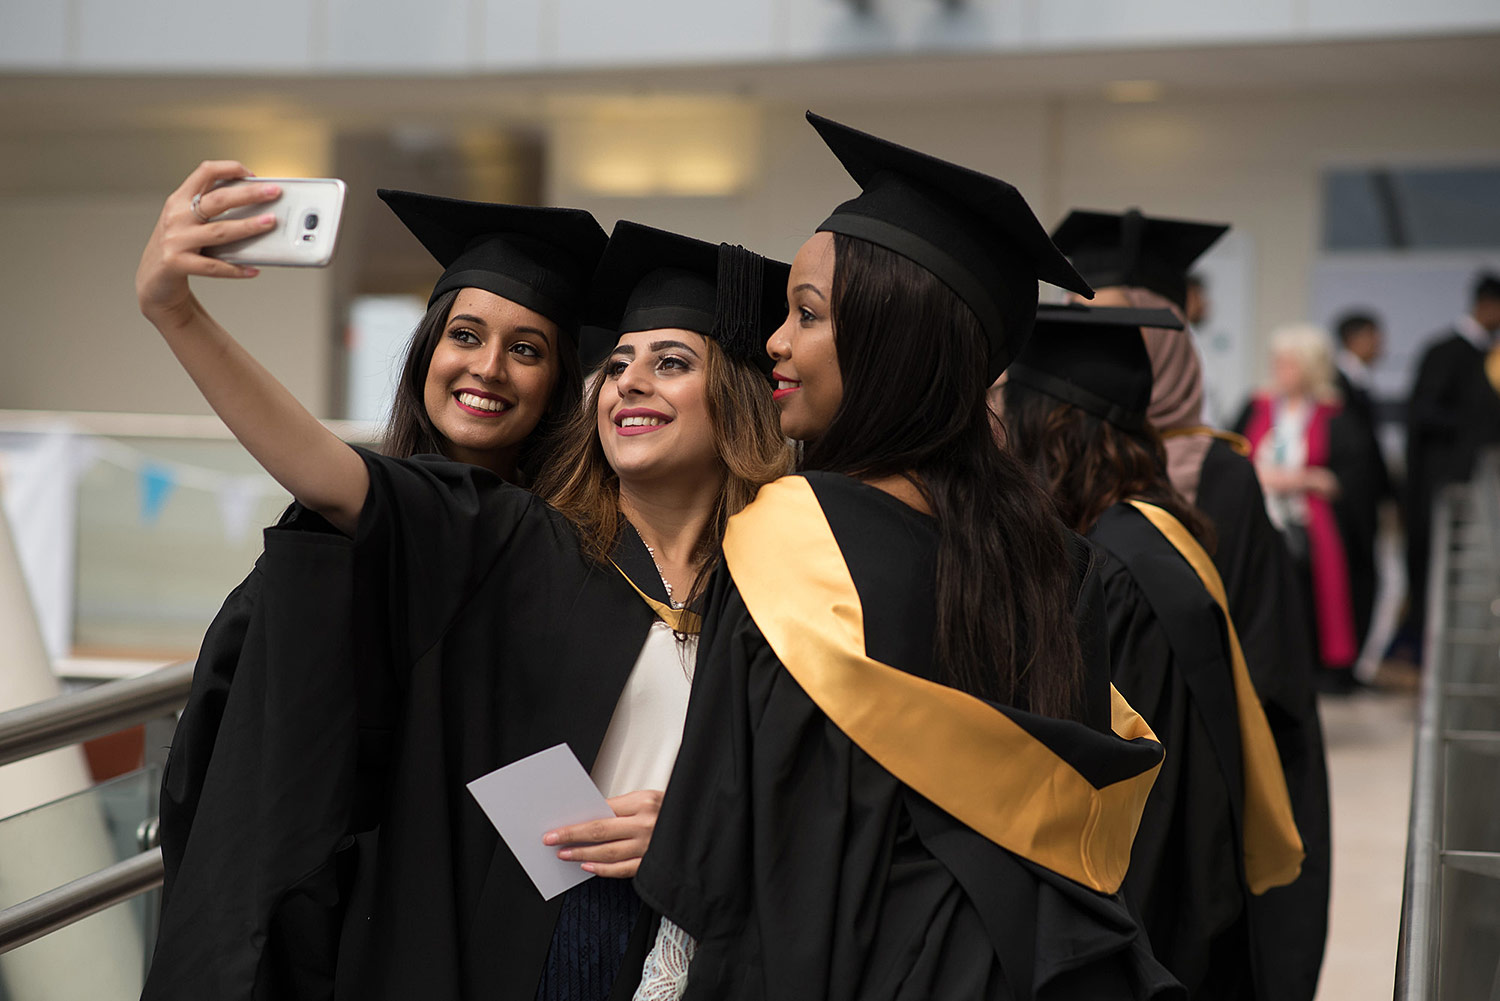 Three students at graduation posing together to take a selfie-photograph.